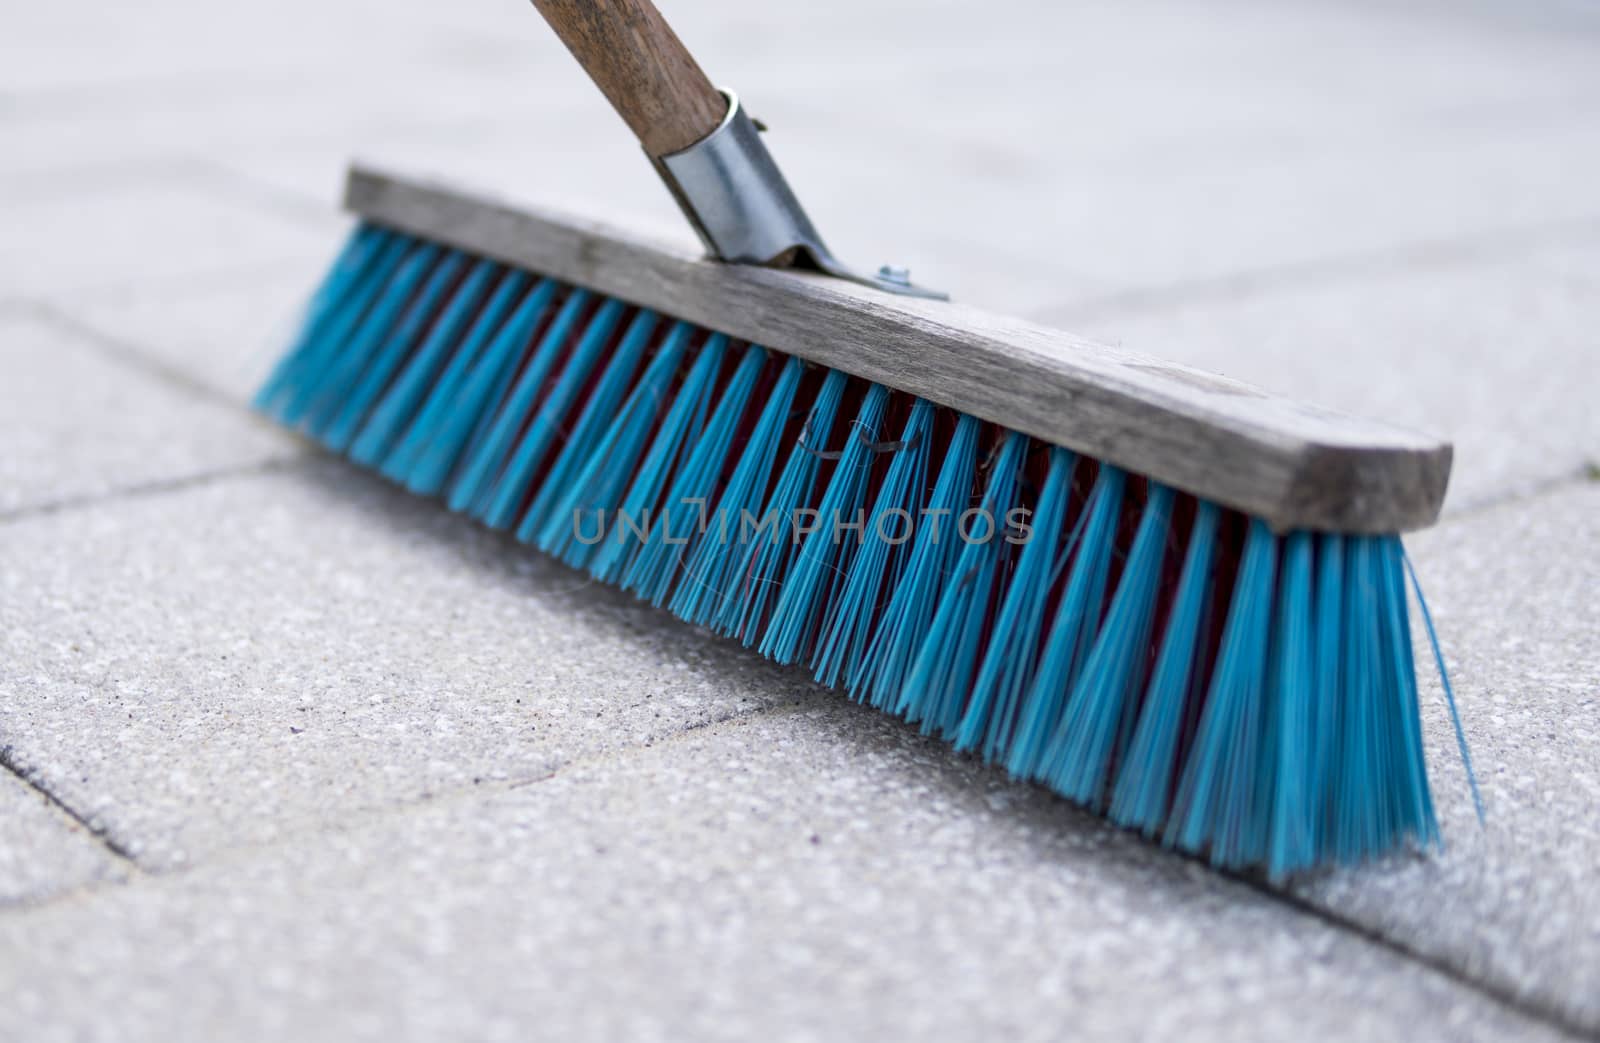 detail of blue brush used for cleaning pavemnet made from concrete stones